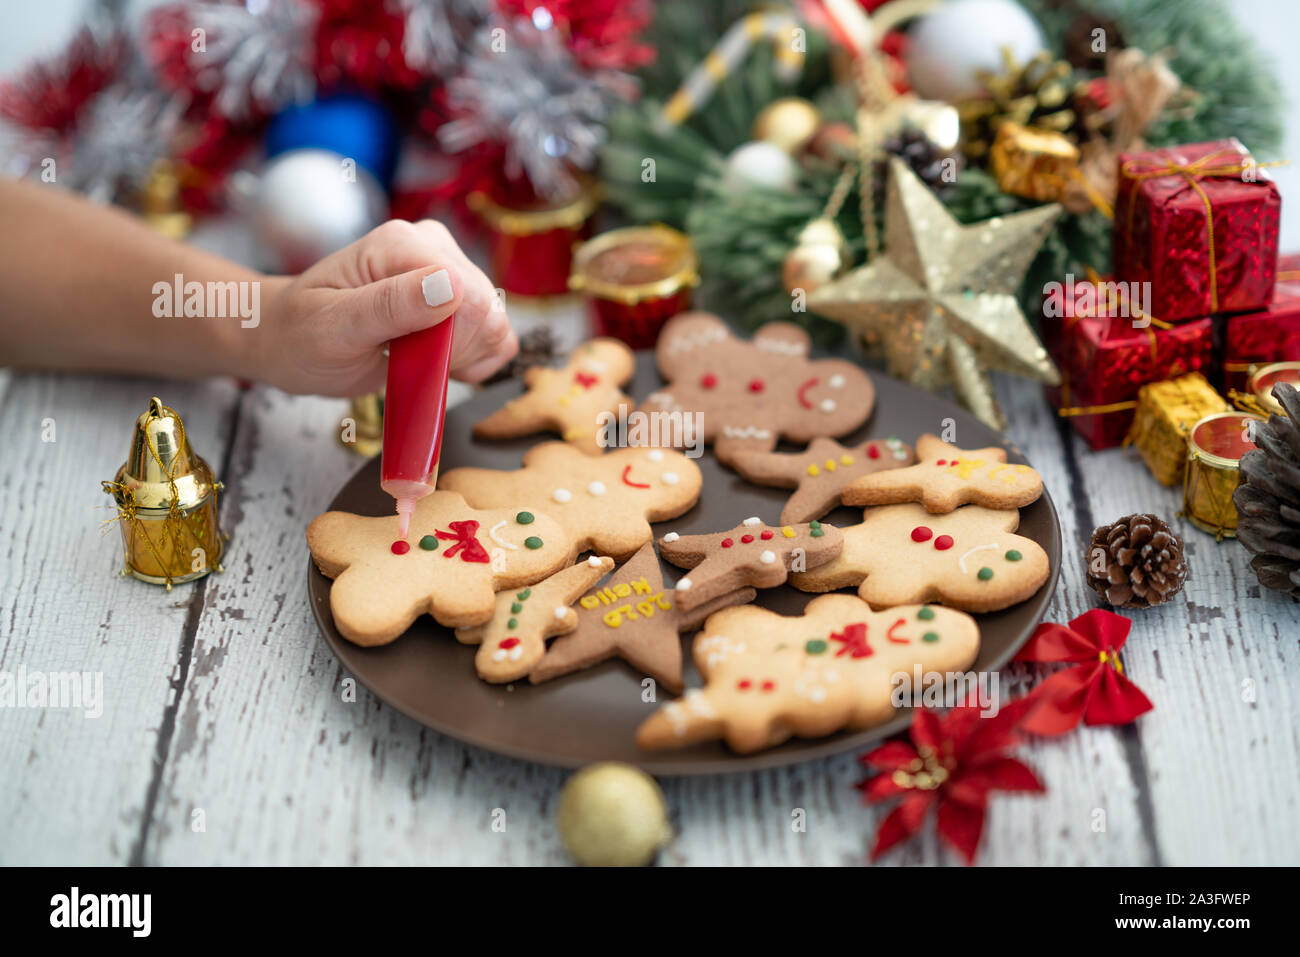 Preparing traditional gingerbread cookies with ornaments for new year celebration. Stock Photo